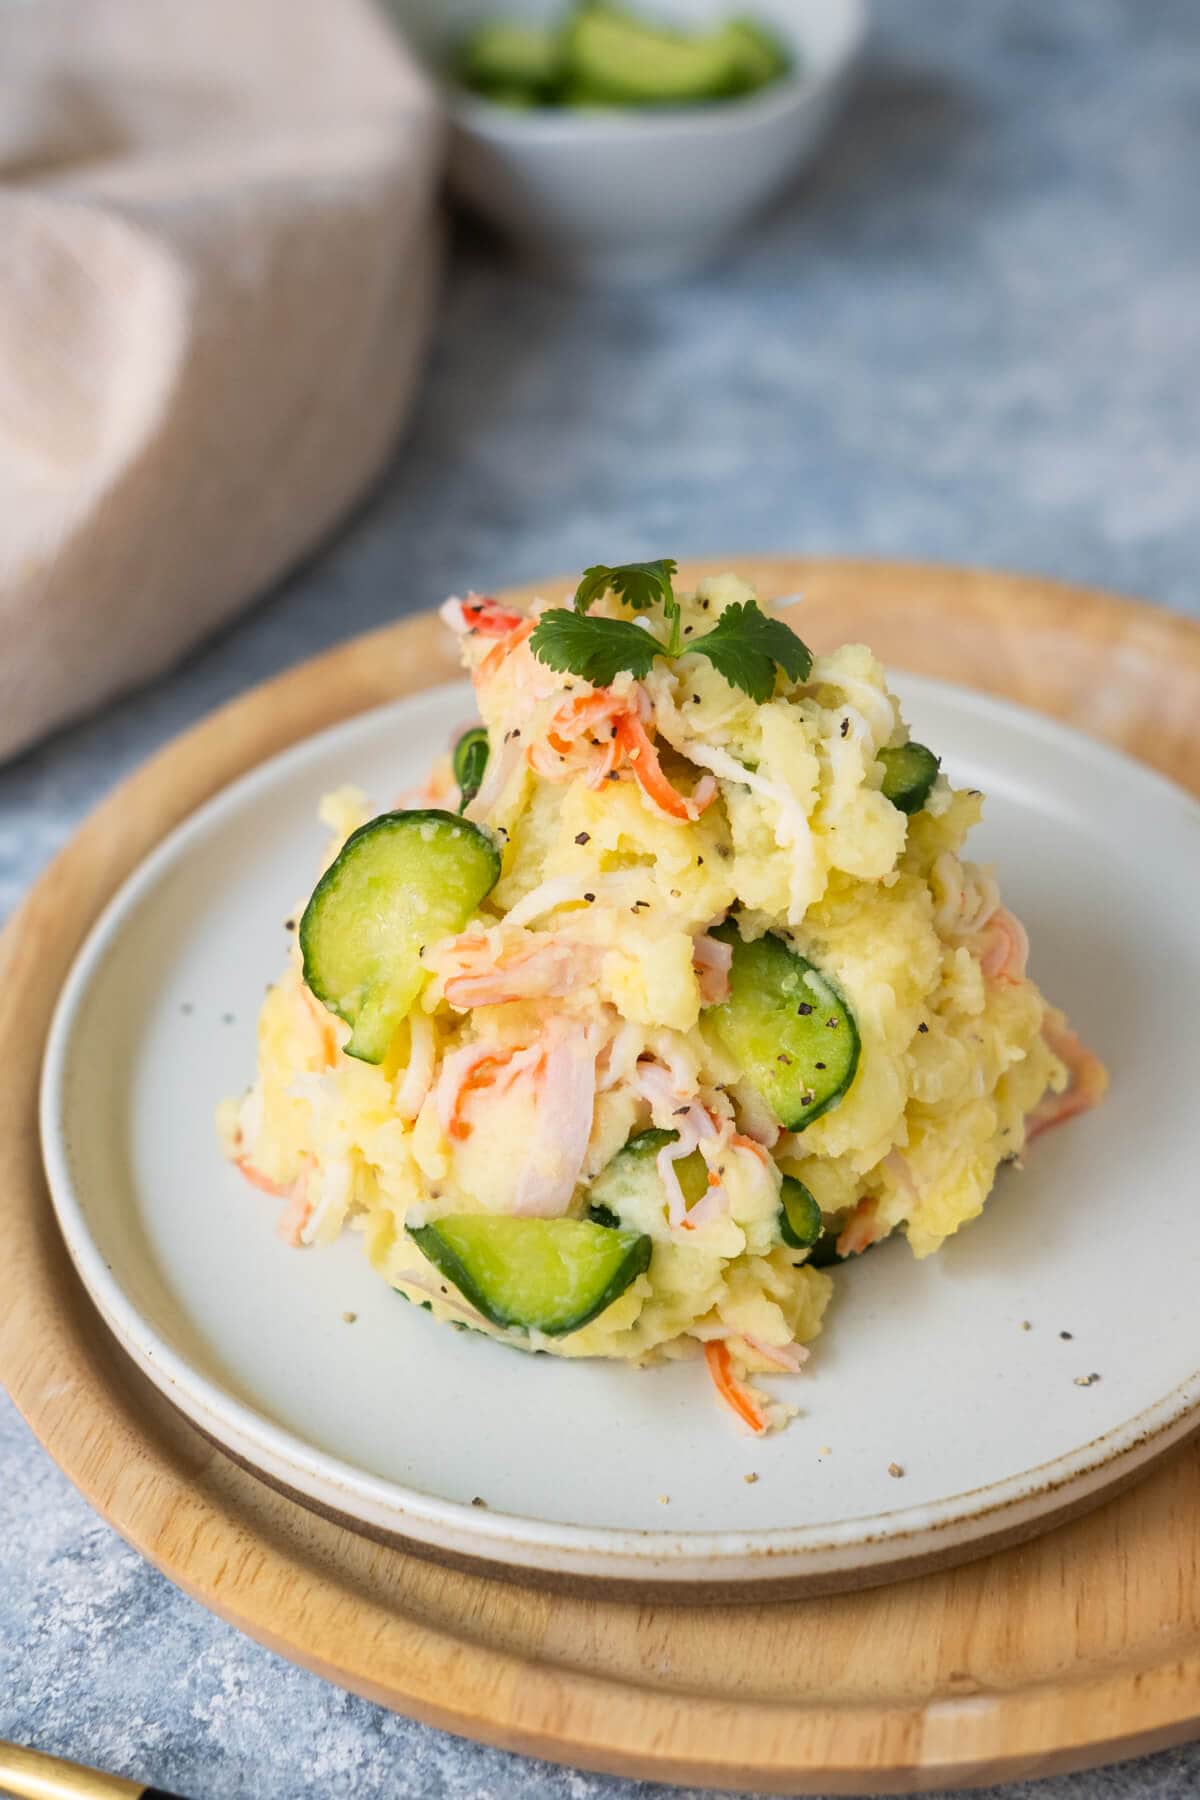 Potato salad containing Japanese cucumber slices and sliced imitation crab meat on a plate with kitchen towel and a small side of cucumber slices placed behind. 